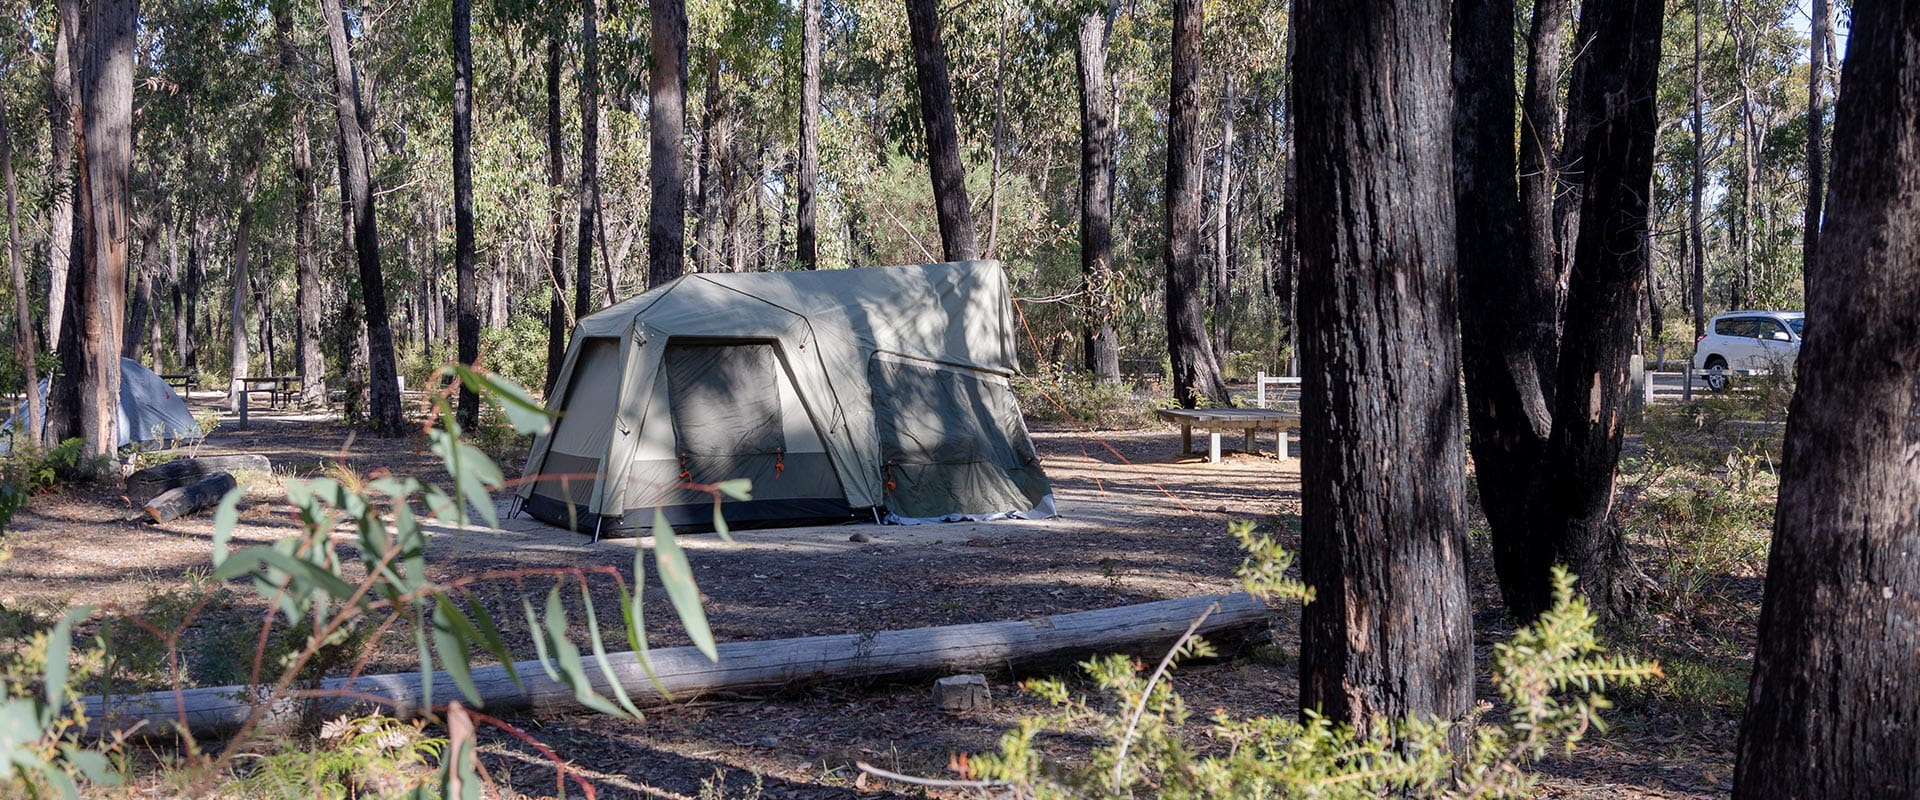 A tent sits within a campground surrounded by trees for shade